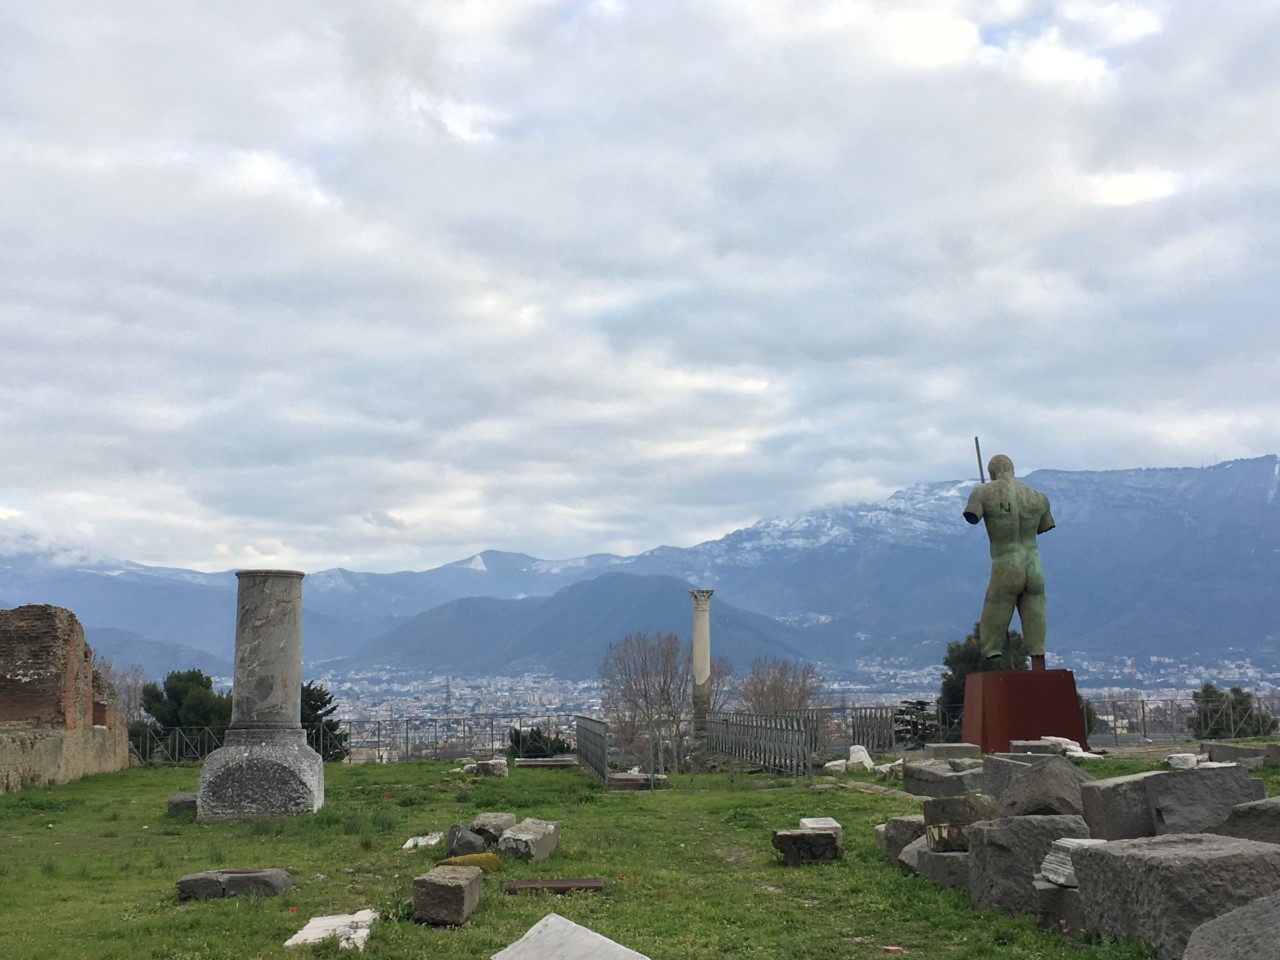 Image of the city of Naples taken from Pompeii Archaeological Park with the mountains behind it